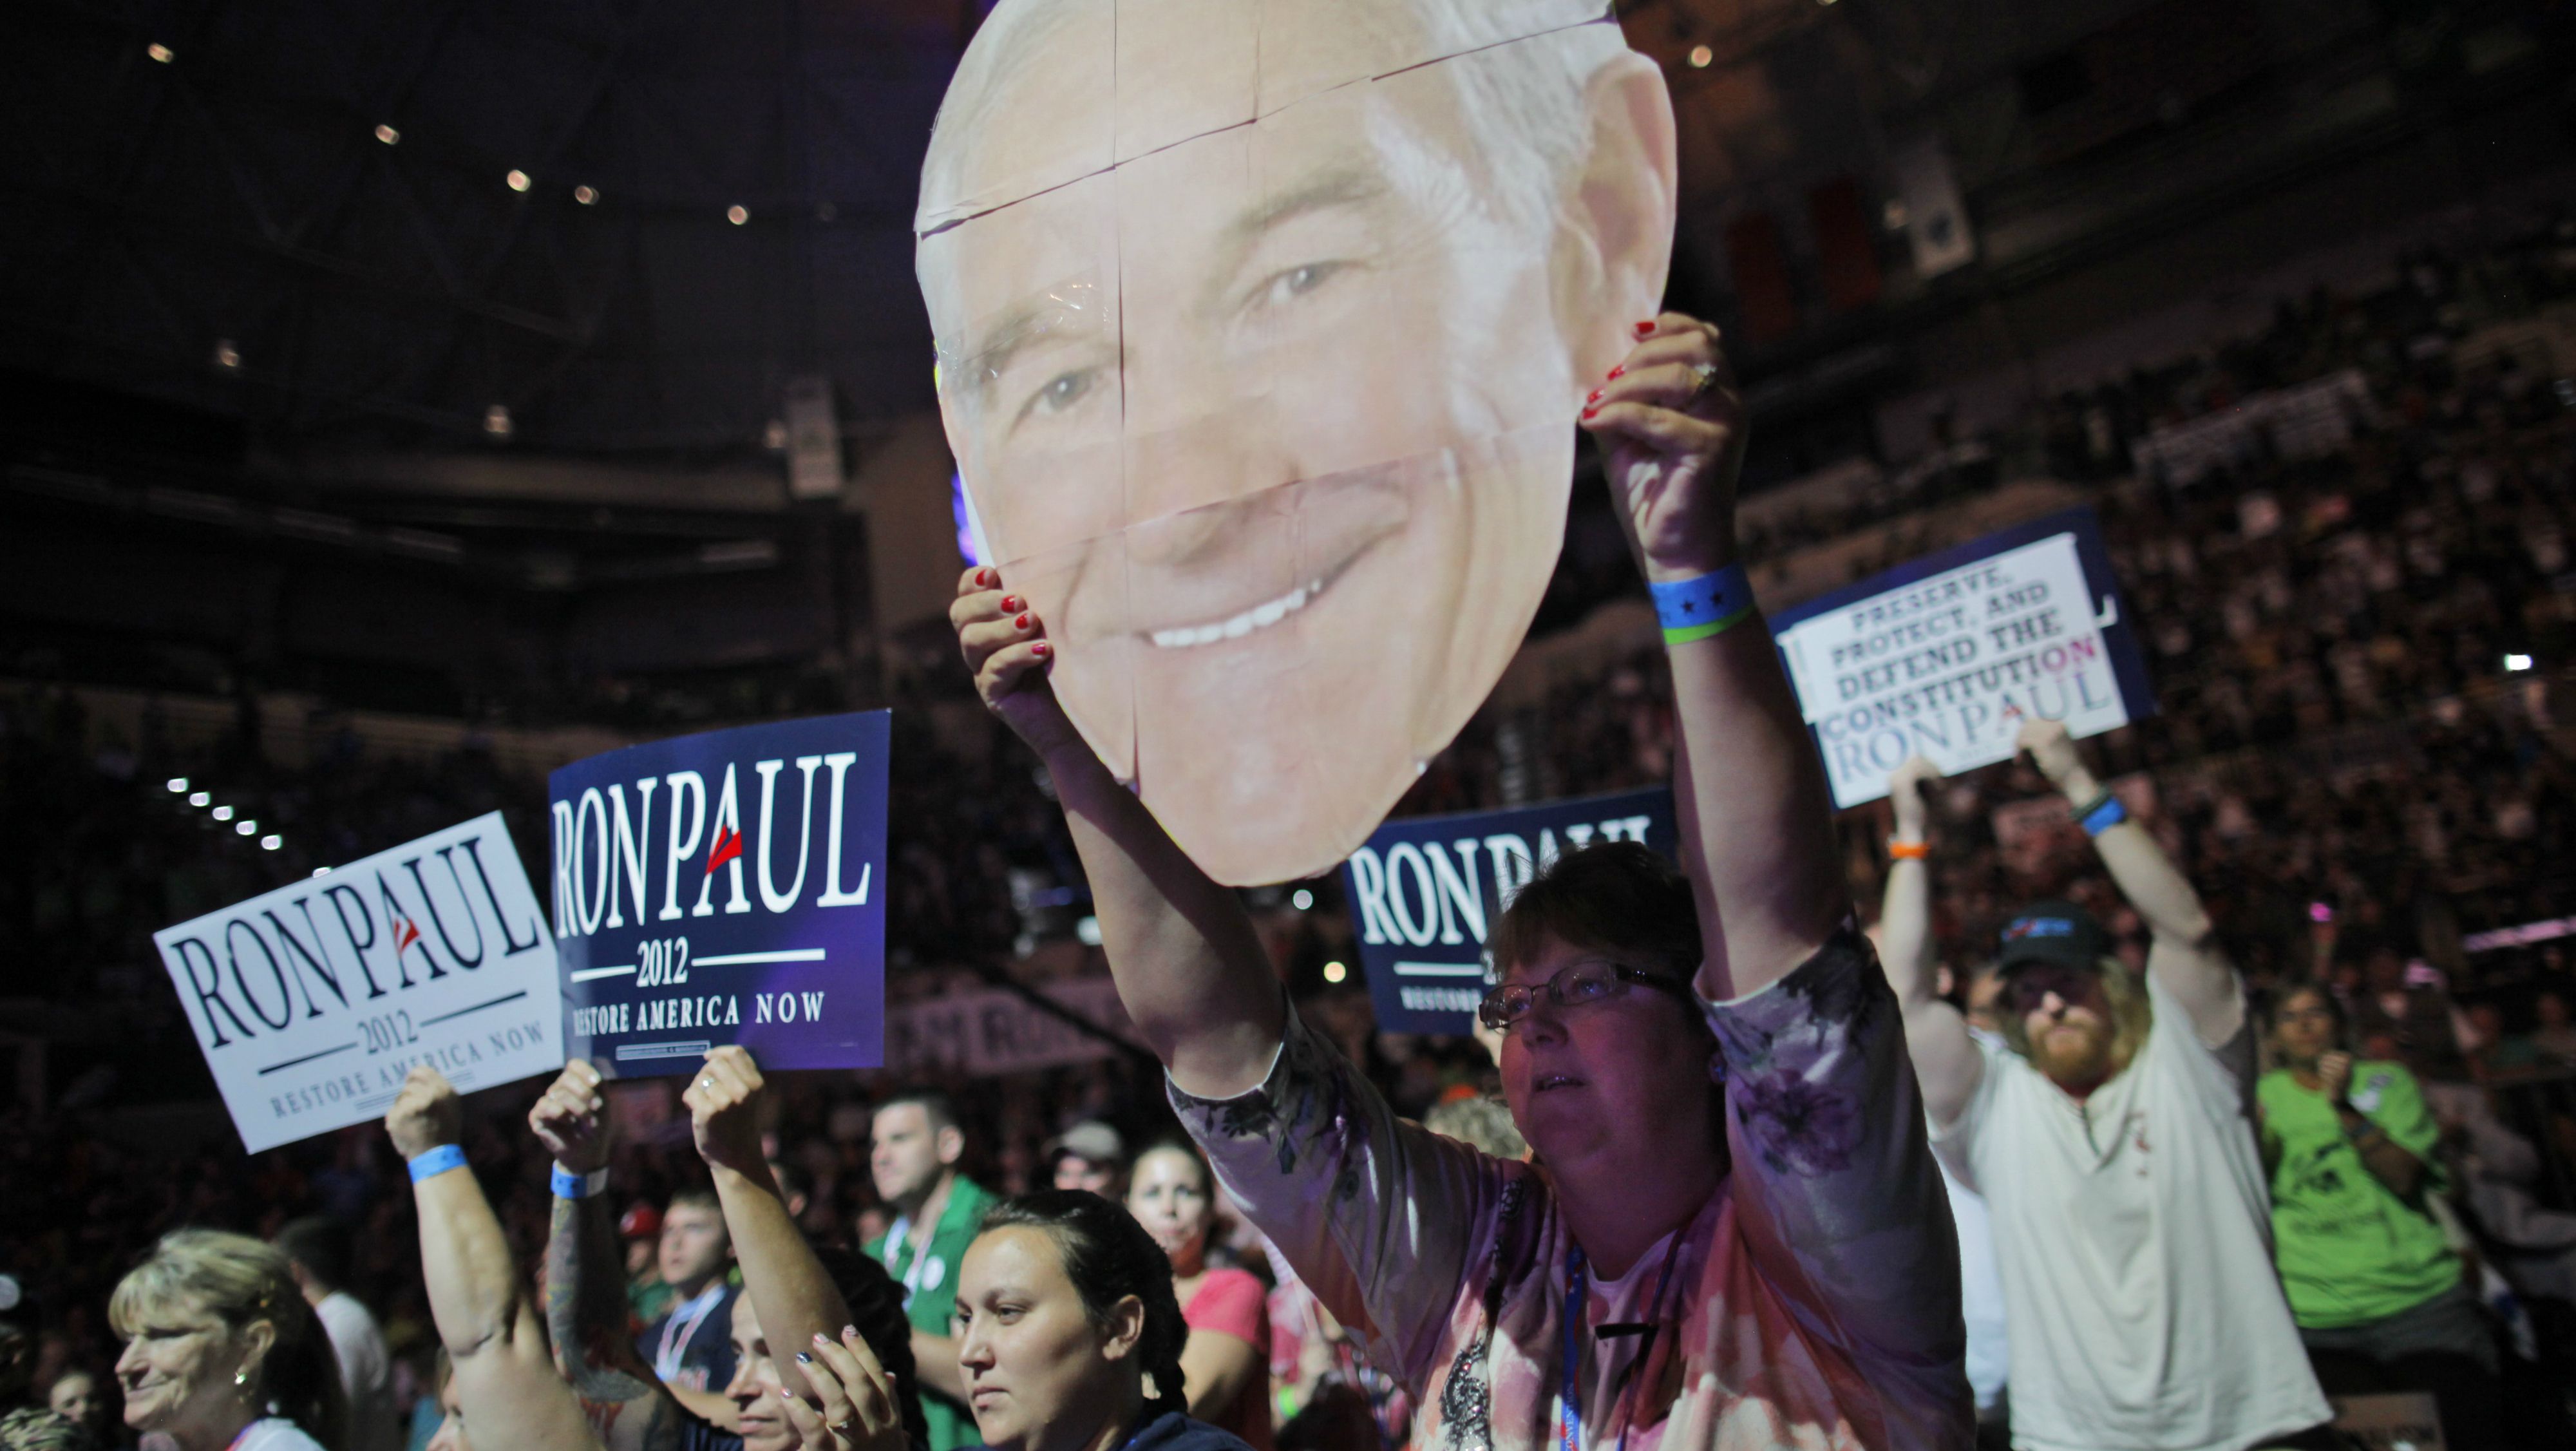 Mary White of Rathdrum, Idaho, shows her support for Rep. Ron Paul, R-Texas, at a rally at the University of South Florida Sun Dome on the sidelines of the Republican National Convention in Tampa, Fla., on Sunday, Aug. 26, 2012. 